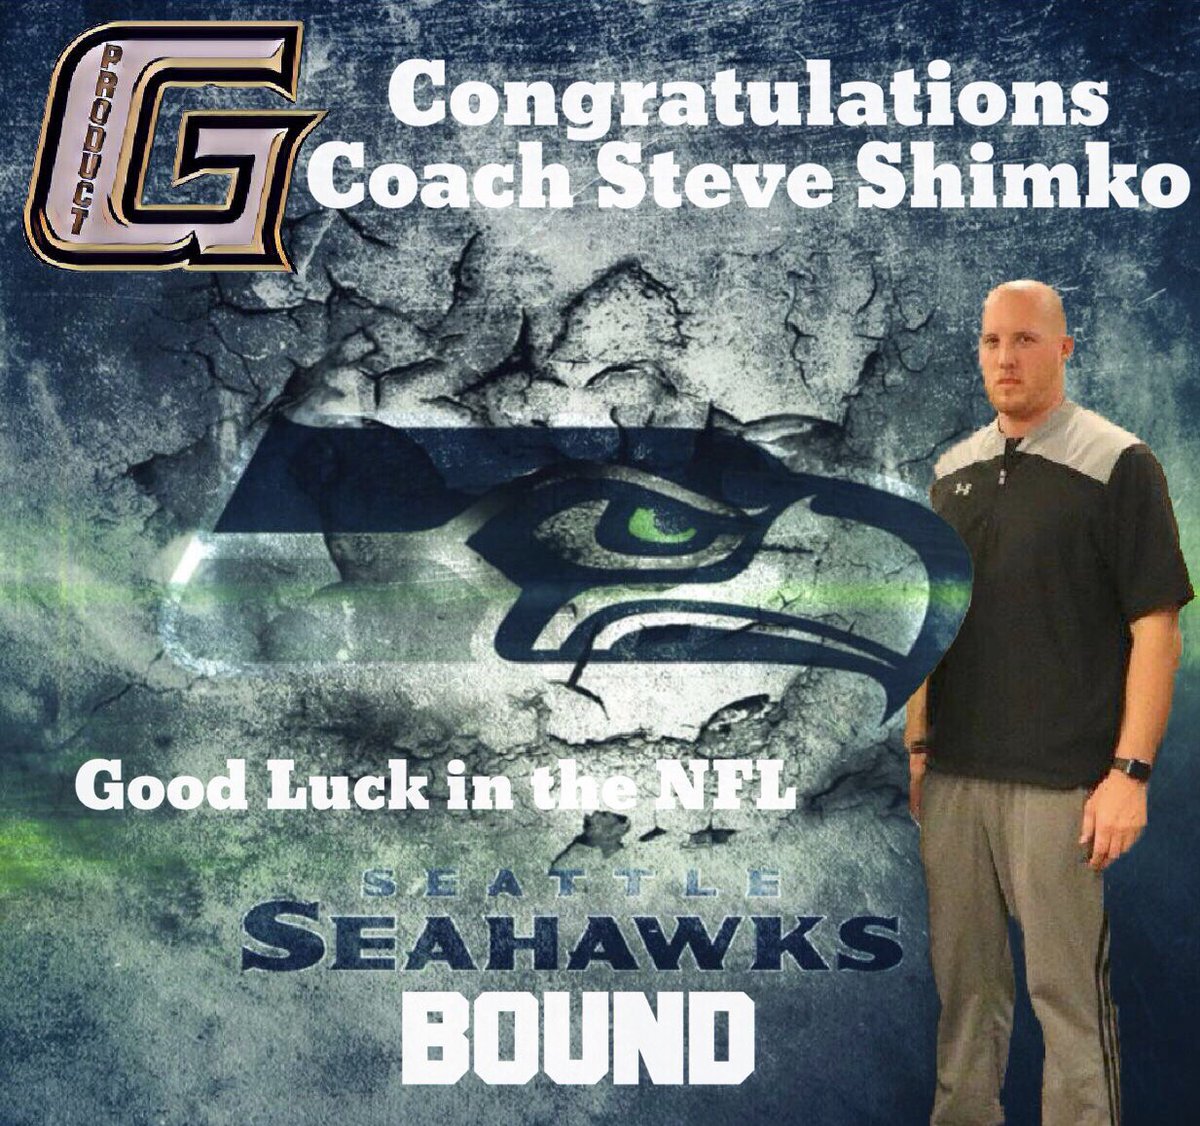 Shimko leaves Garden City for job with the Seattle Seahawks